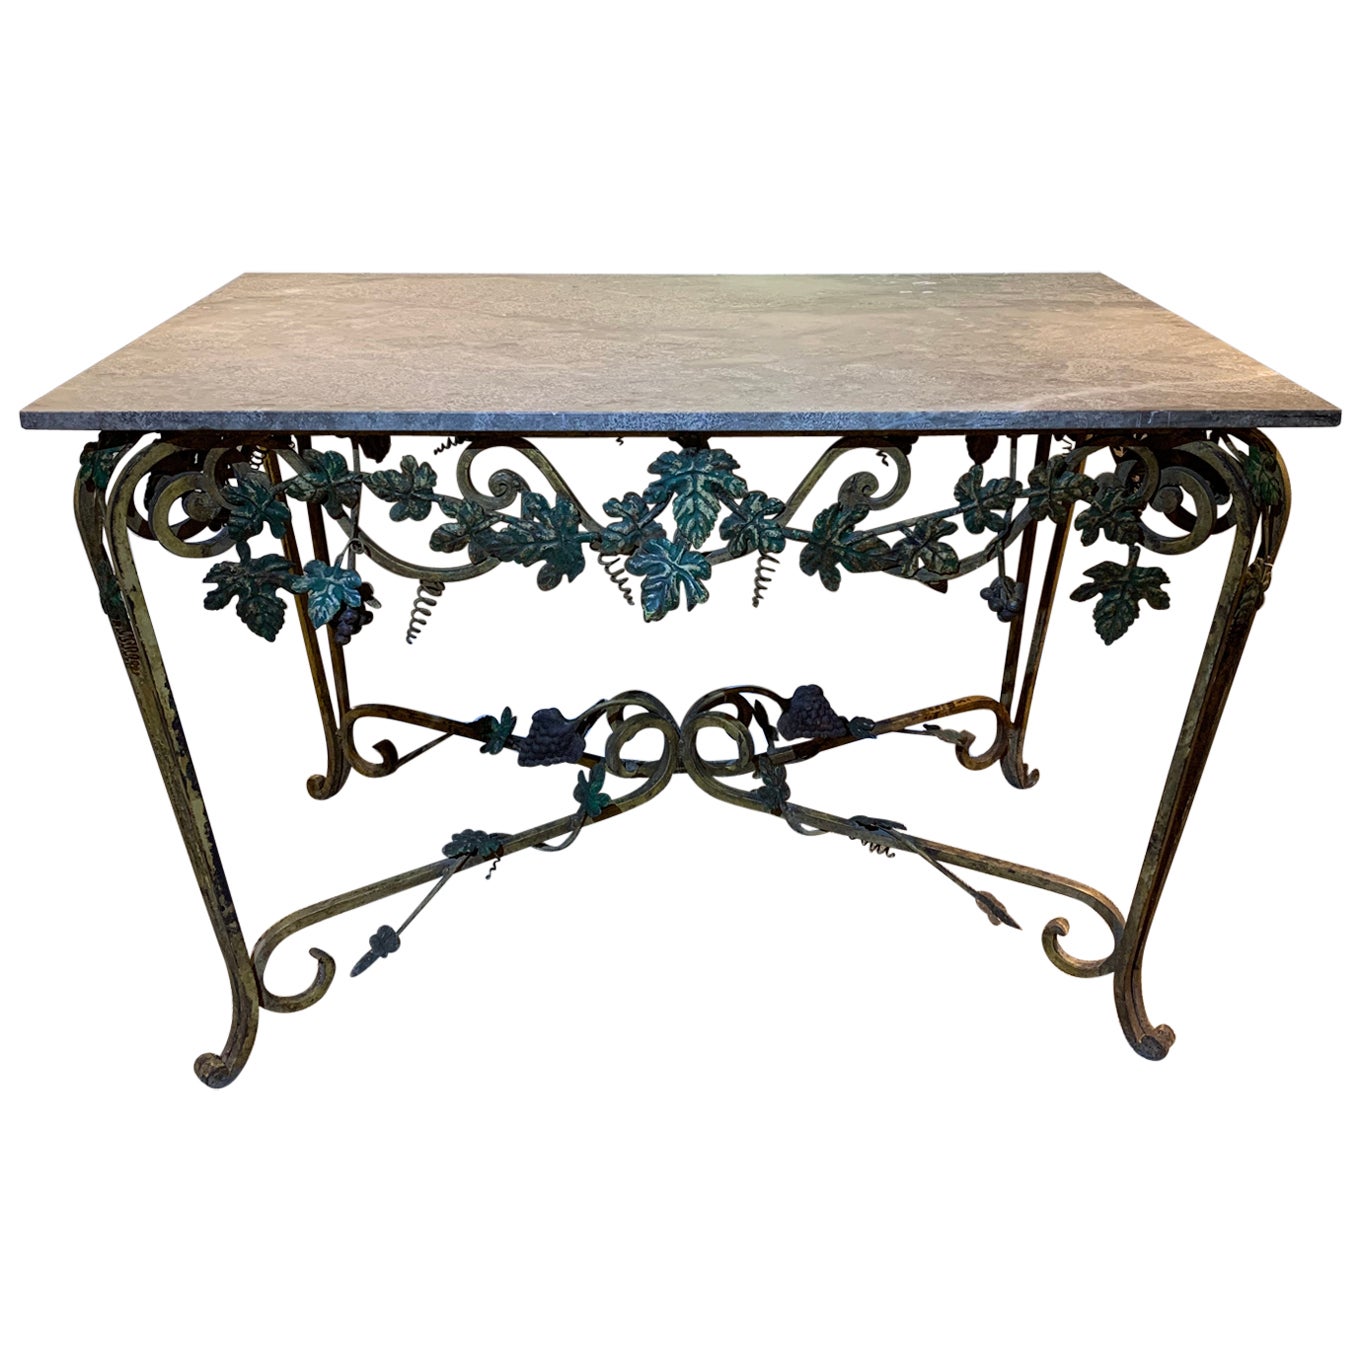 Midcentury French Wrought Iron & Marble Console Table with Leaf Decoration For Sale